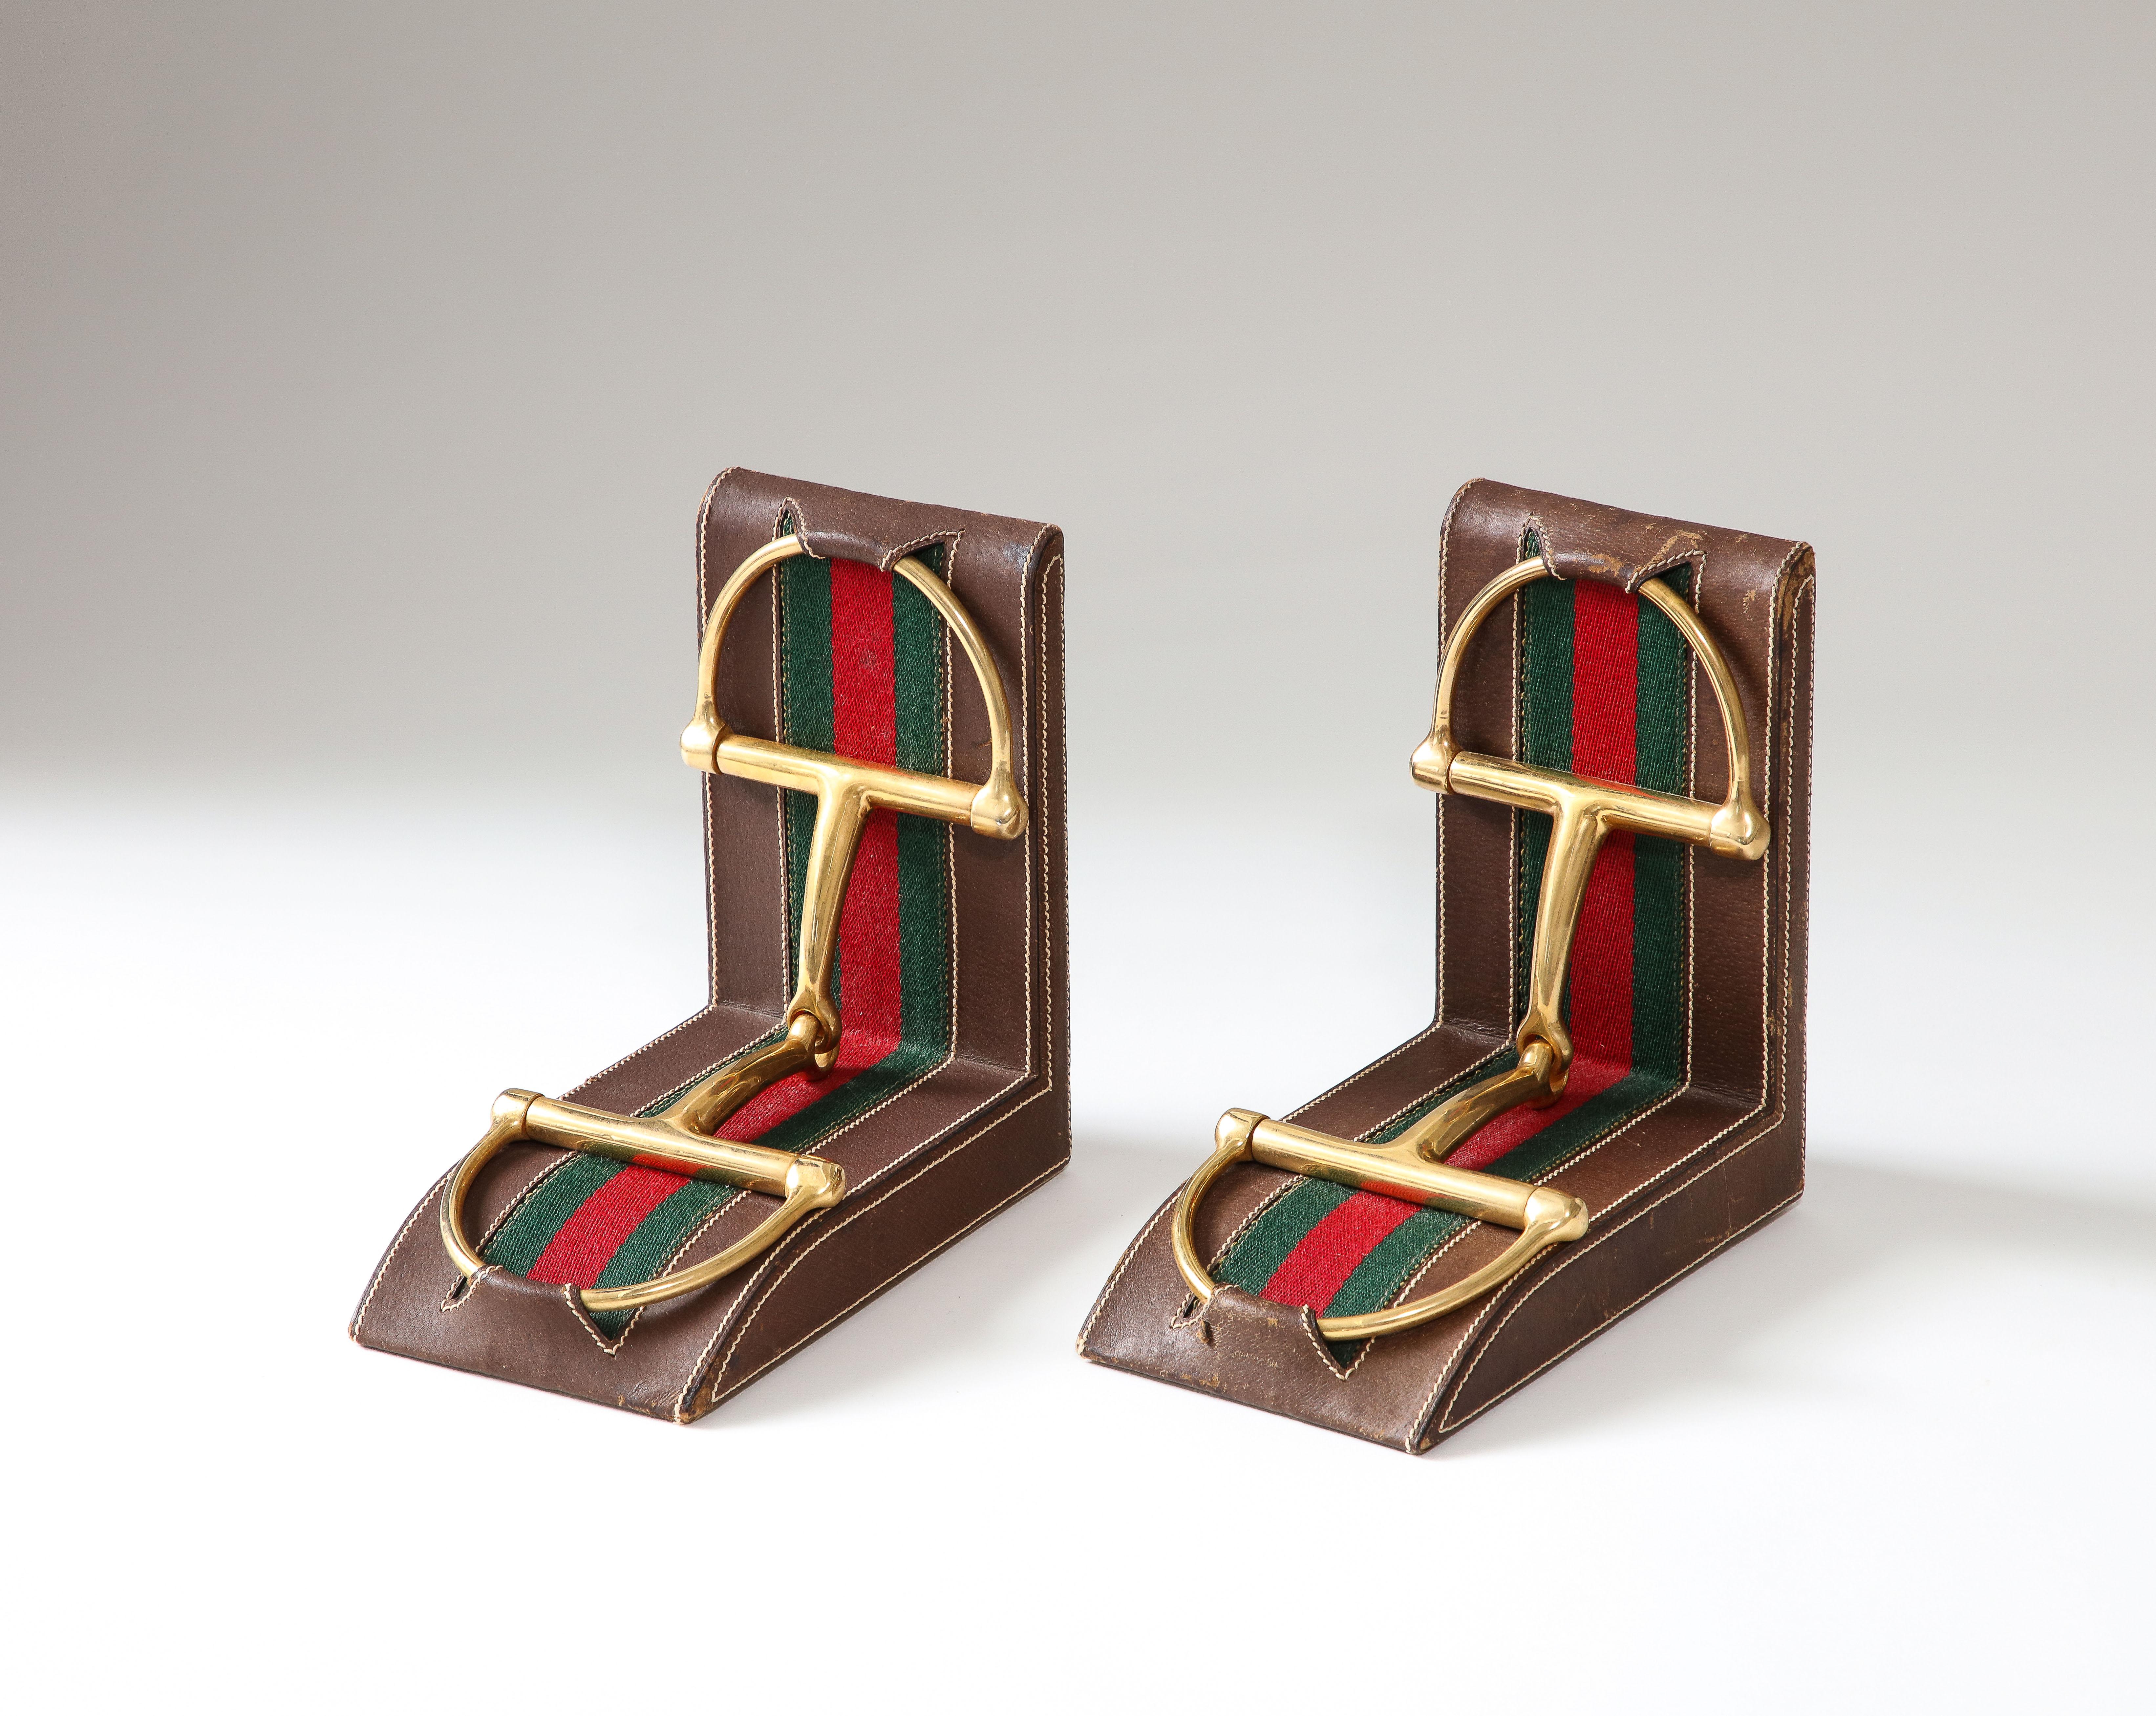 Modern Pair of Leather and Brass Bookends, Gucci, Italy, c. 1970 For Sale